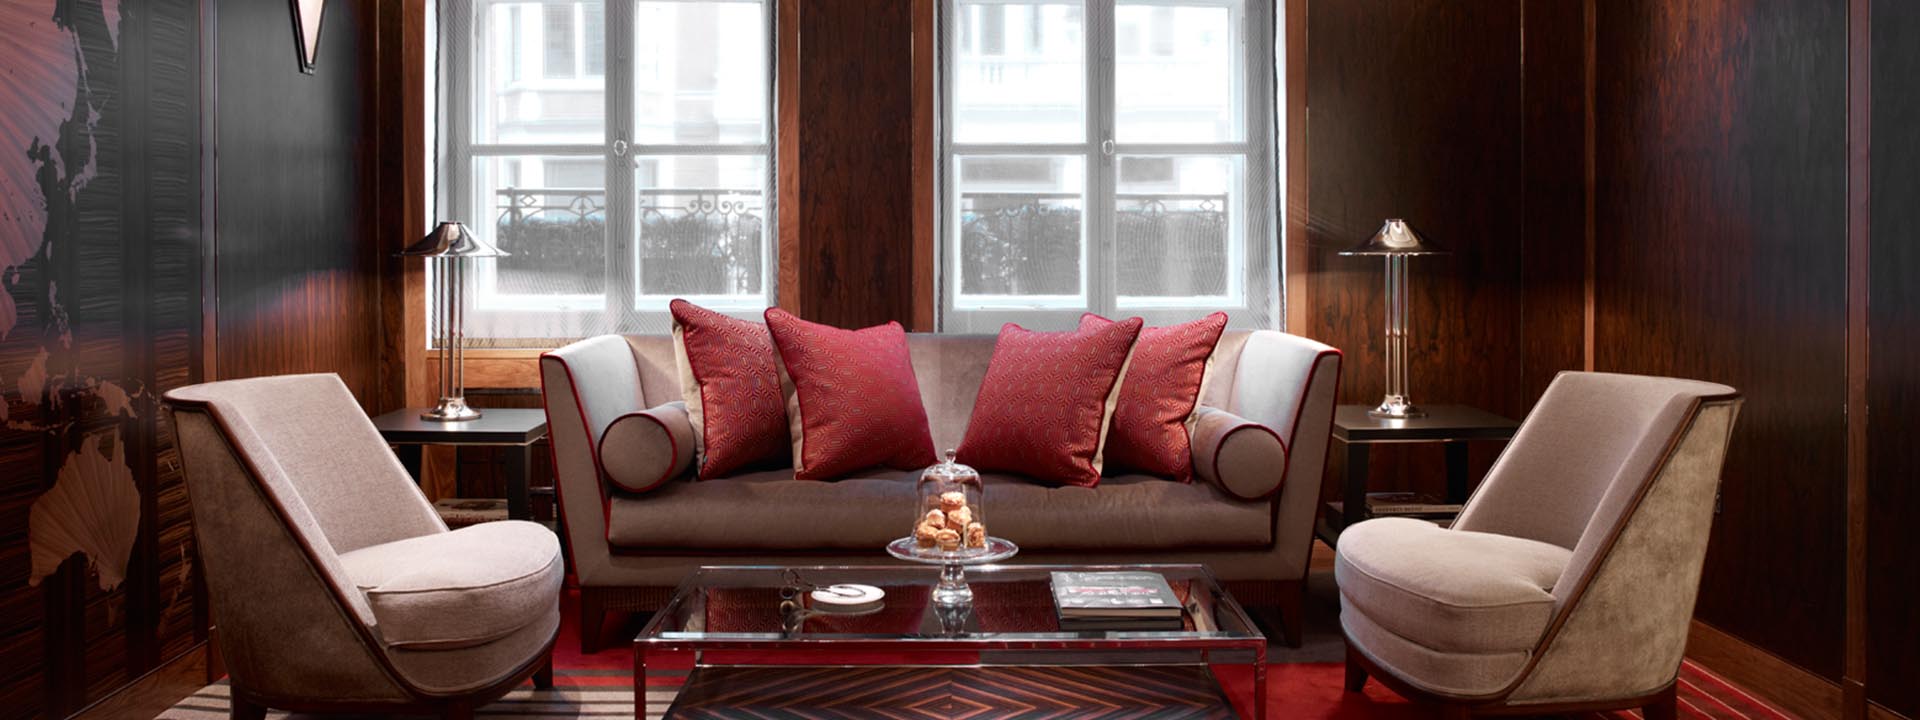 A view of Claridge's Map Room with a comfortable sofa with two armchairs in shades of red.